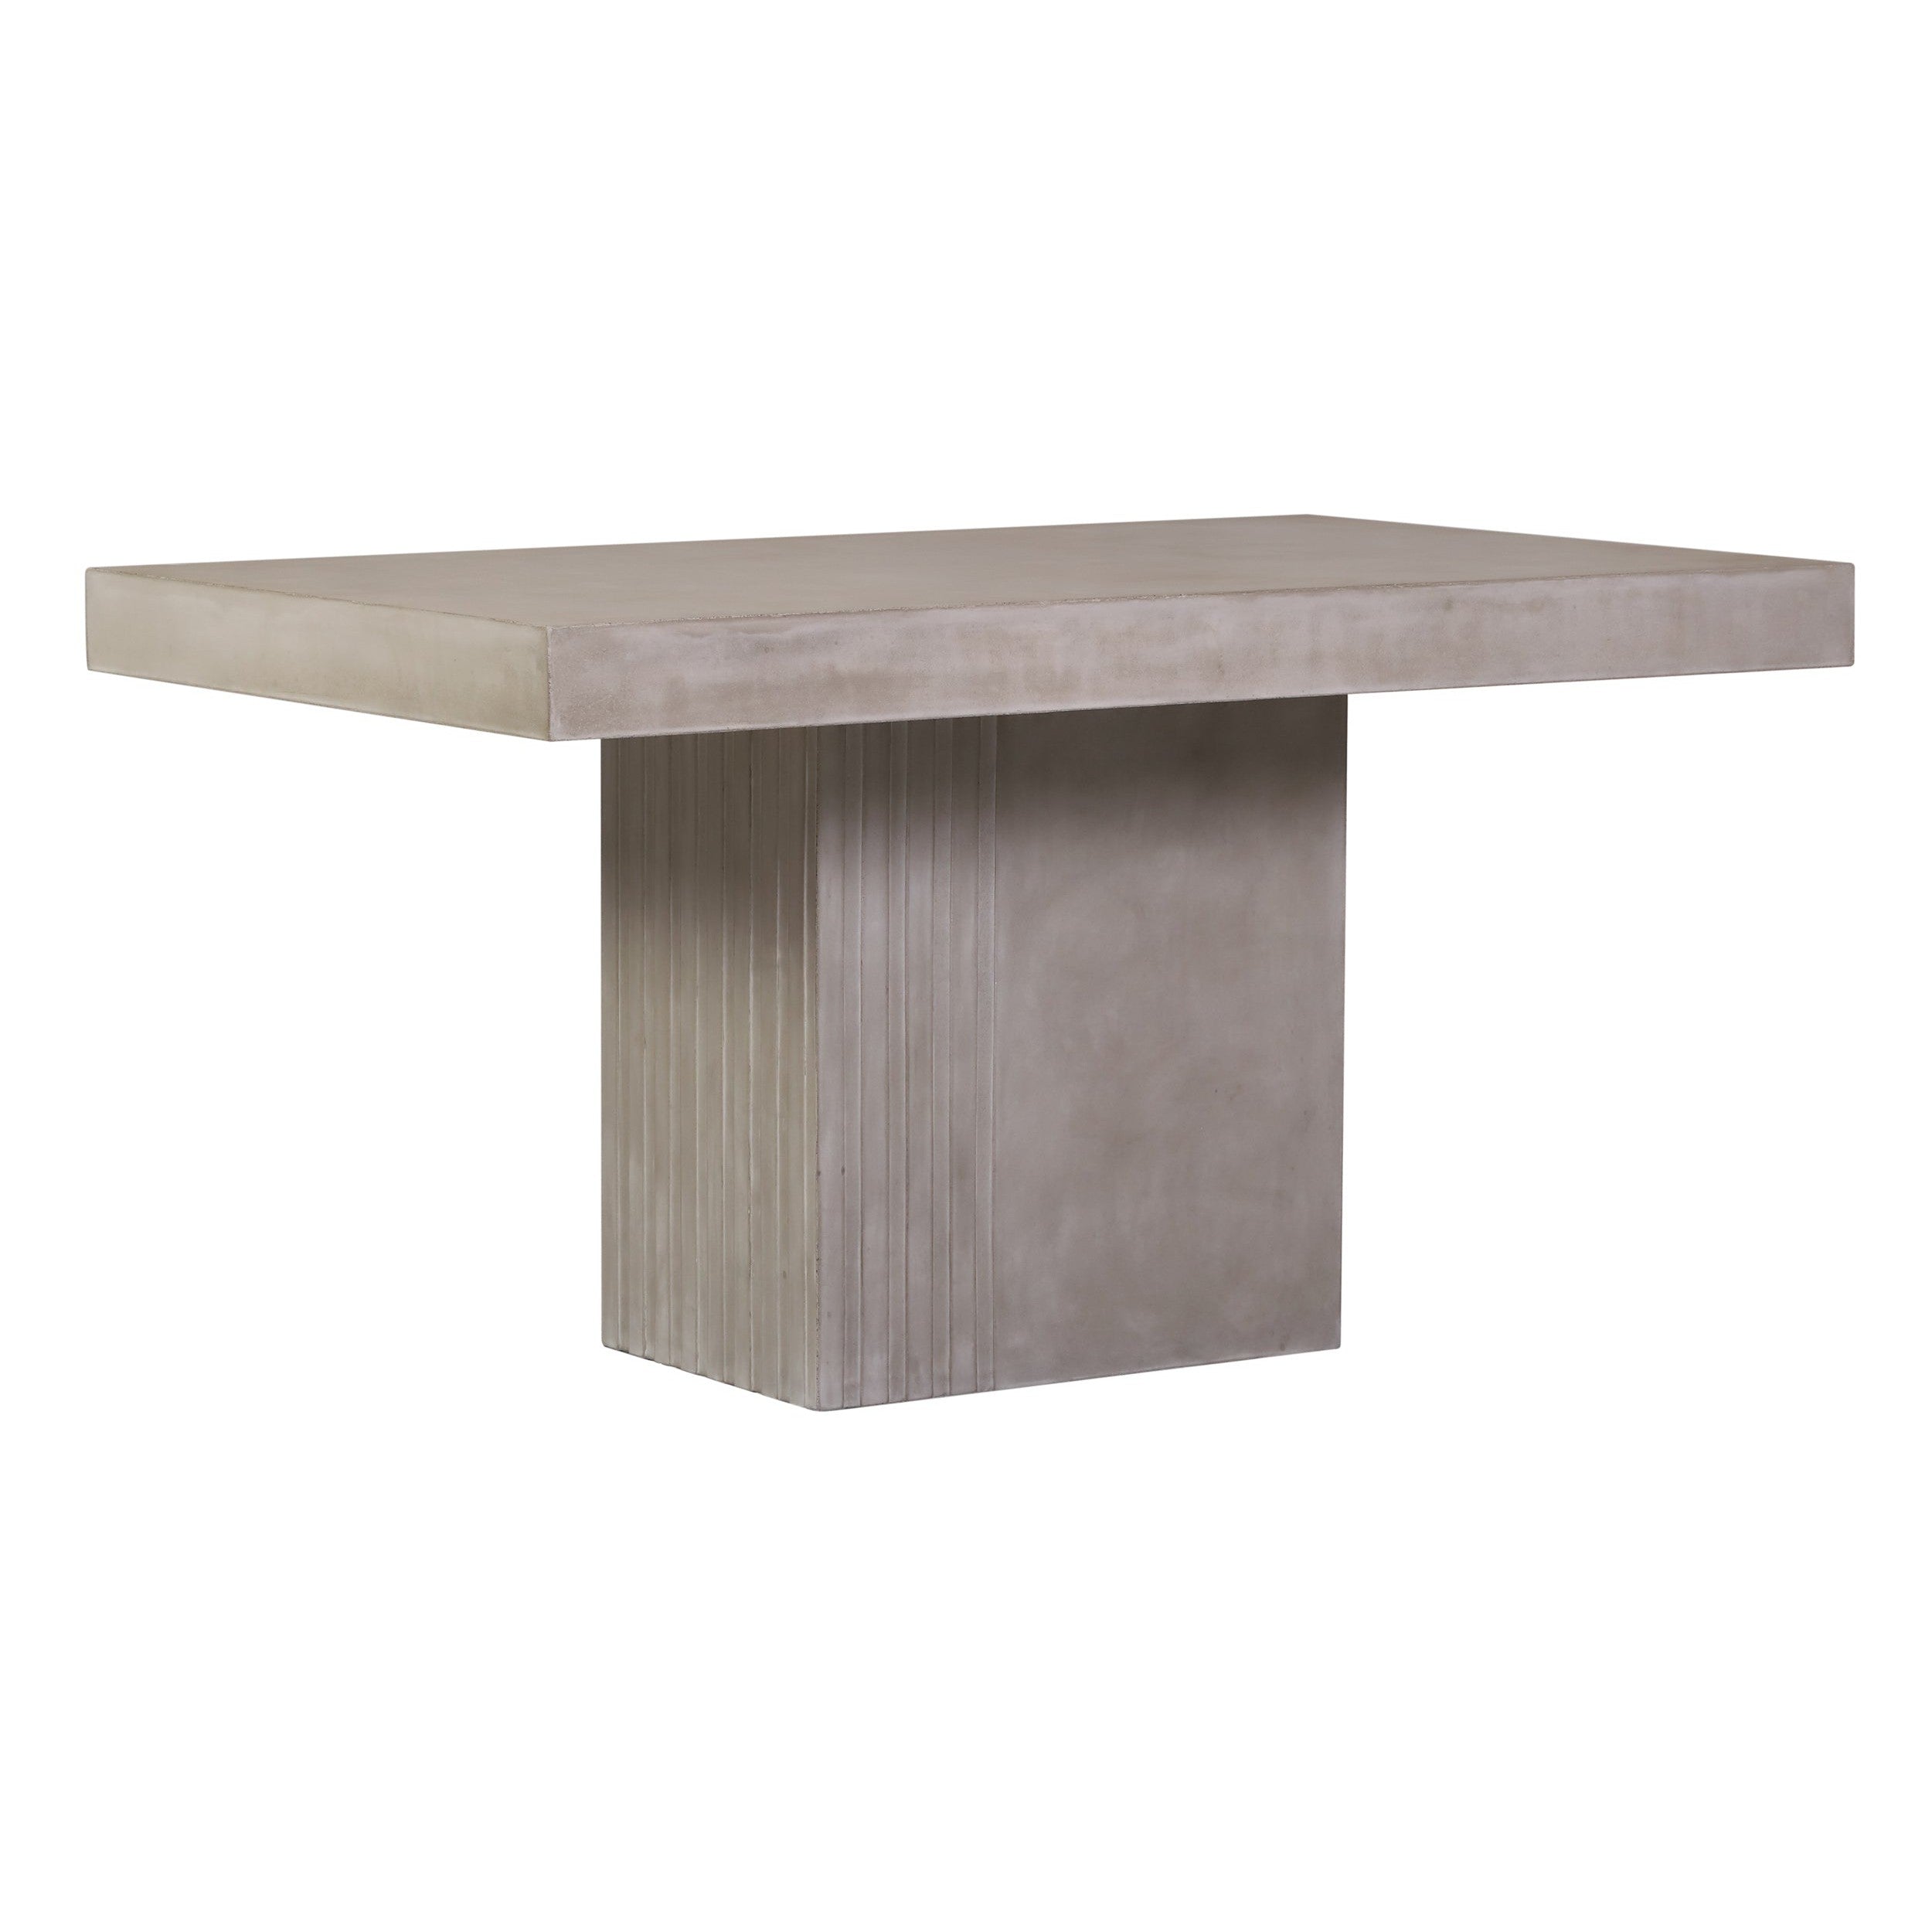 Tama Rectangle Dining Table - Single Pedestal - Slate Gray Outdoor Dining Table